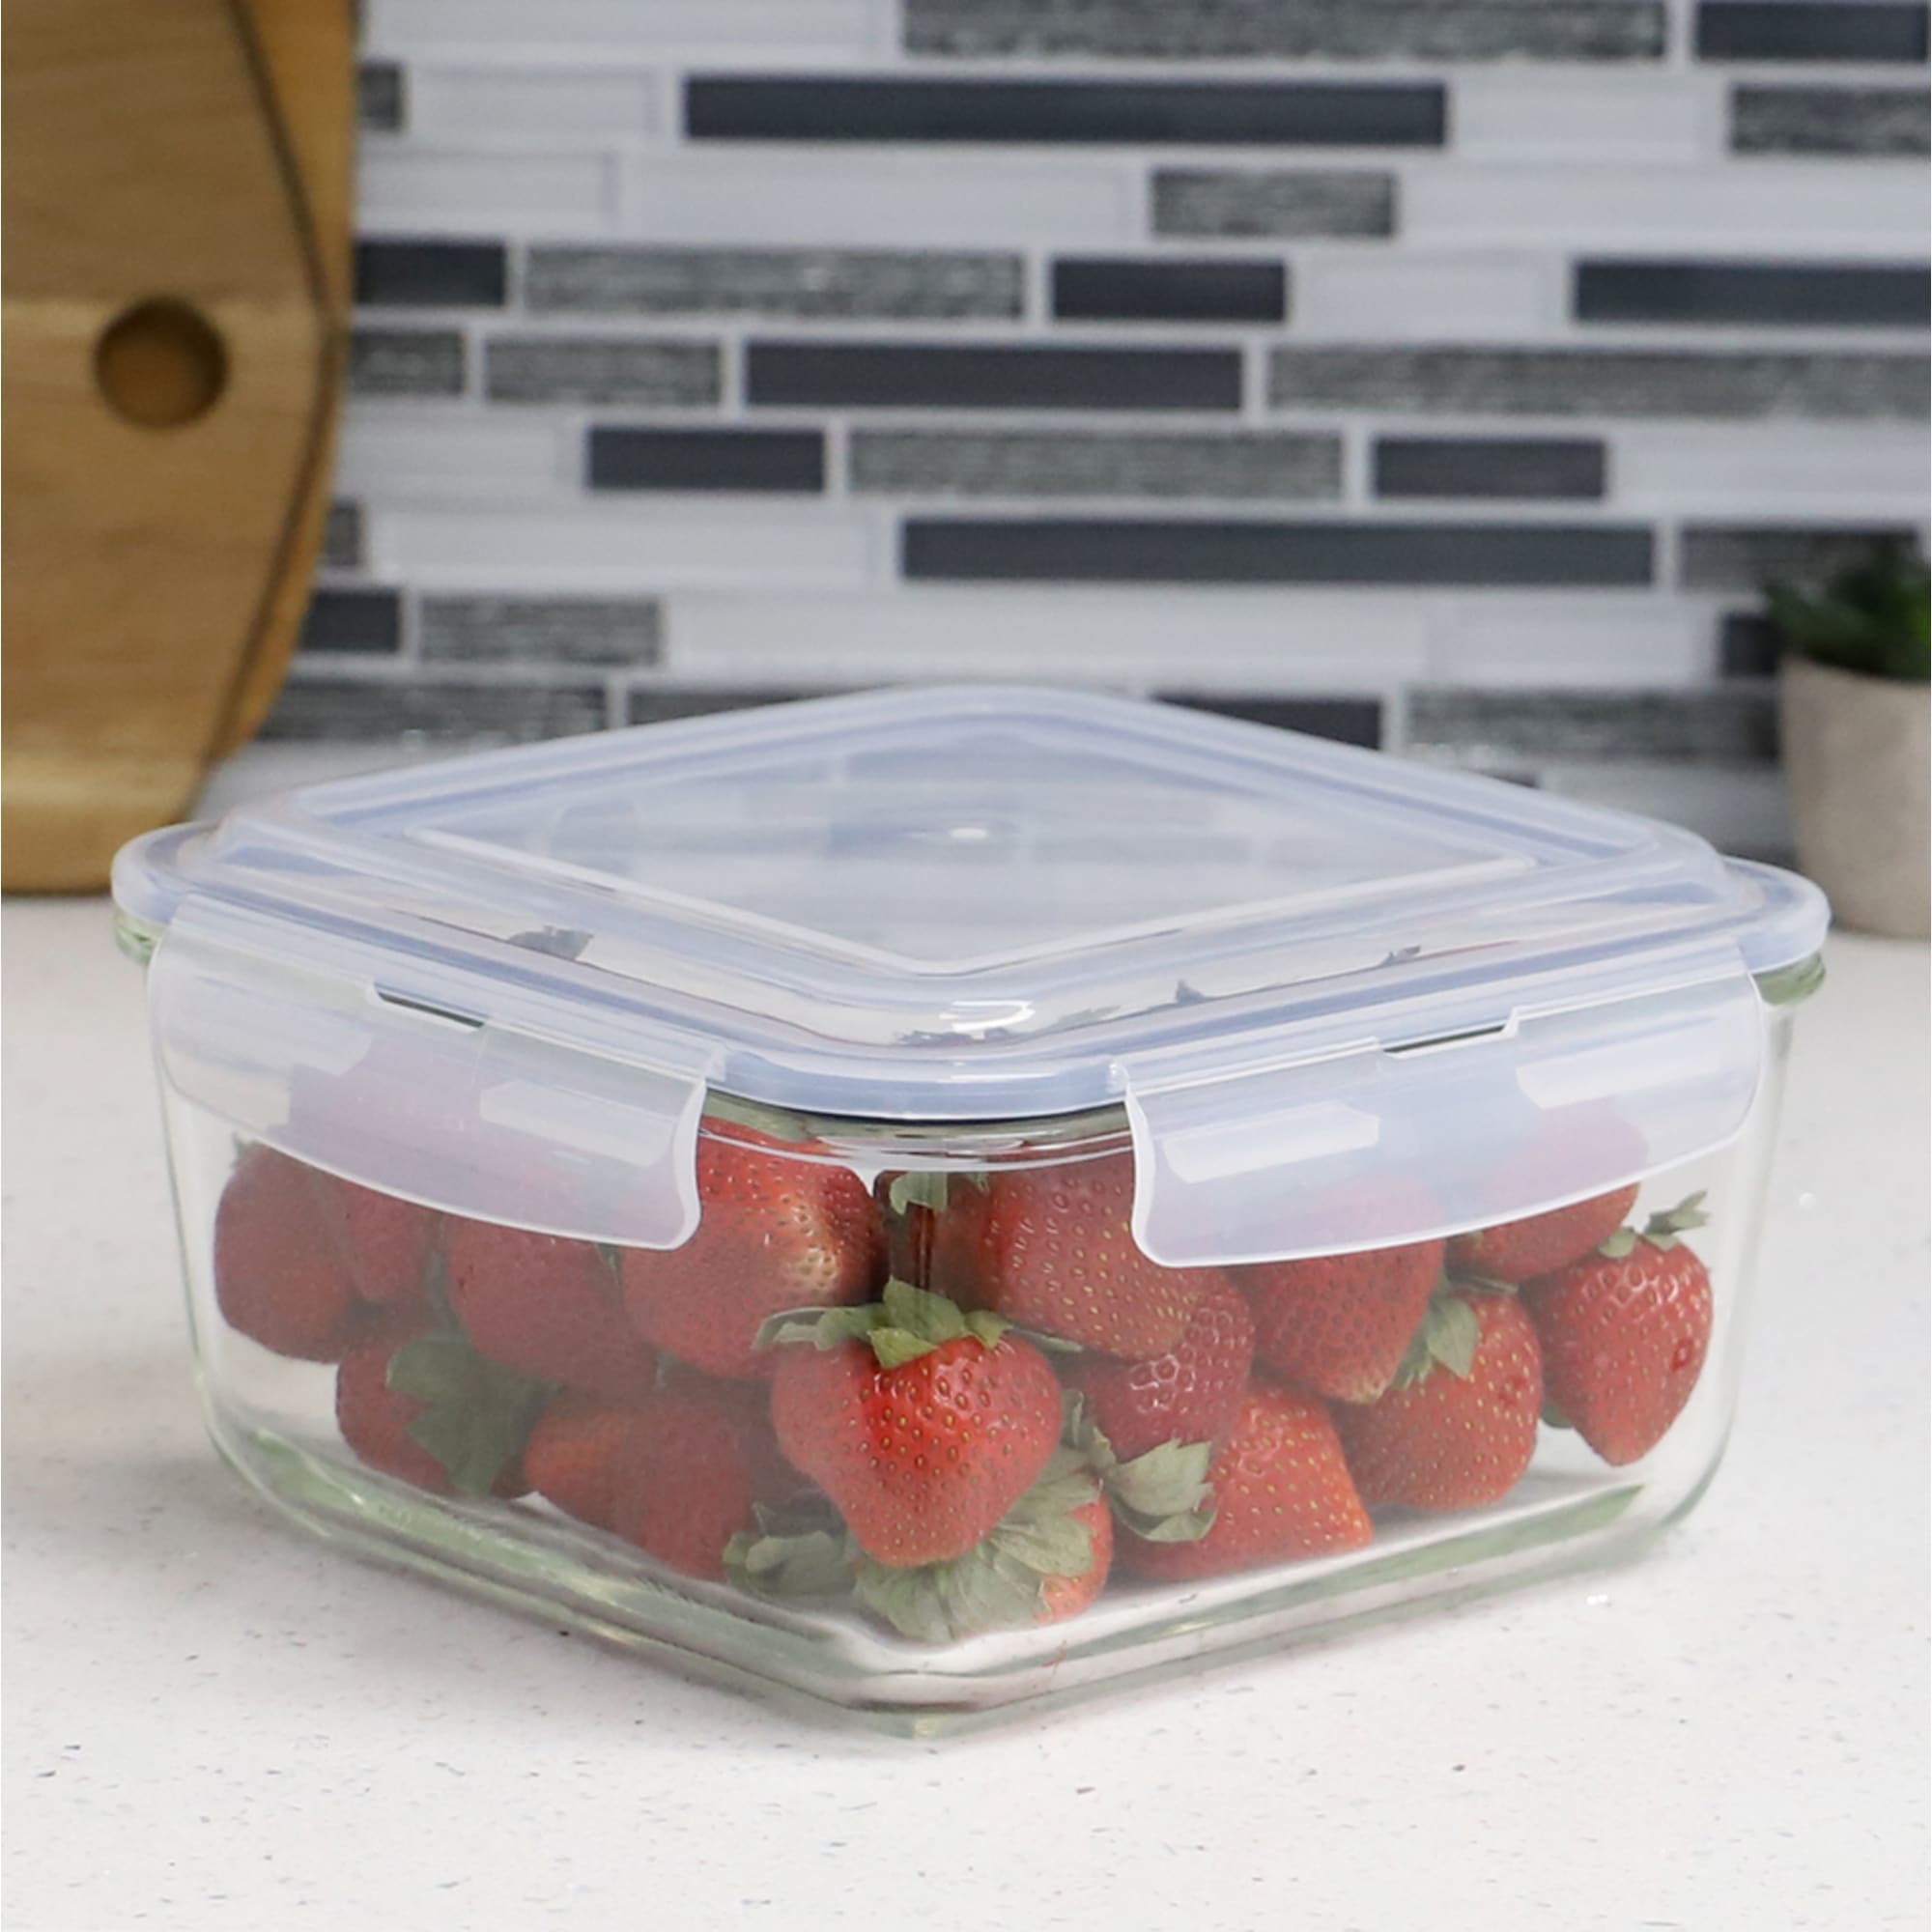 Michael Graves Design 74 Ounce High Borosilicate Glass Square Food Storage Container with Indigo Rubber Seal $10.00 EACH, CASE PACK OF 12